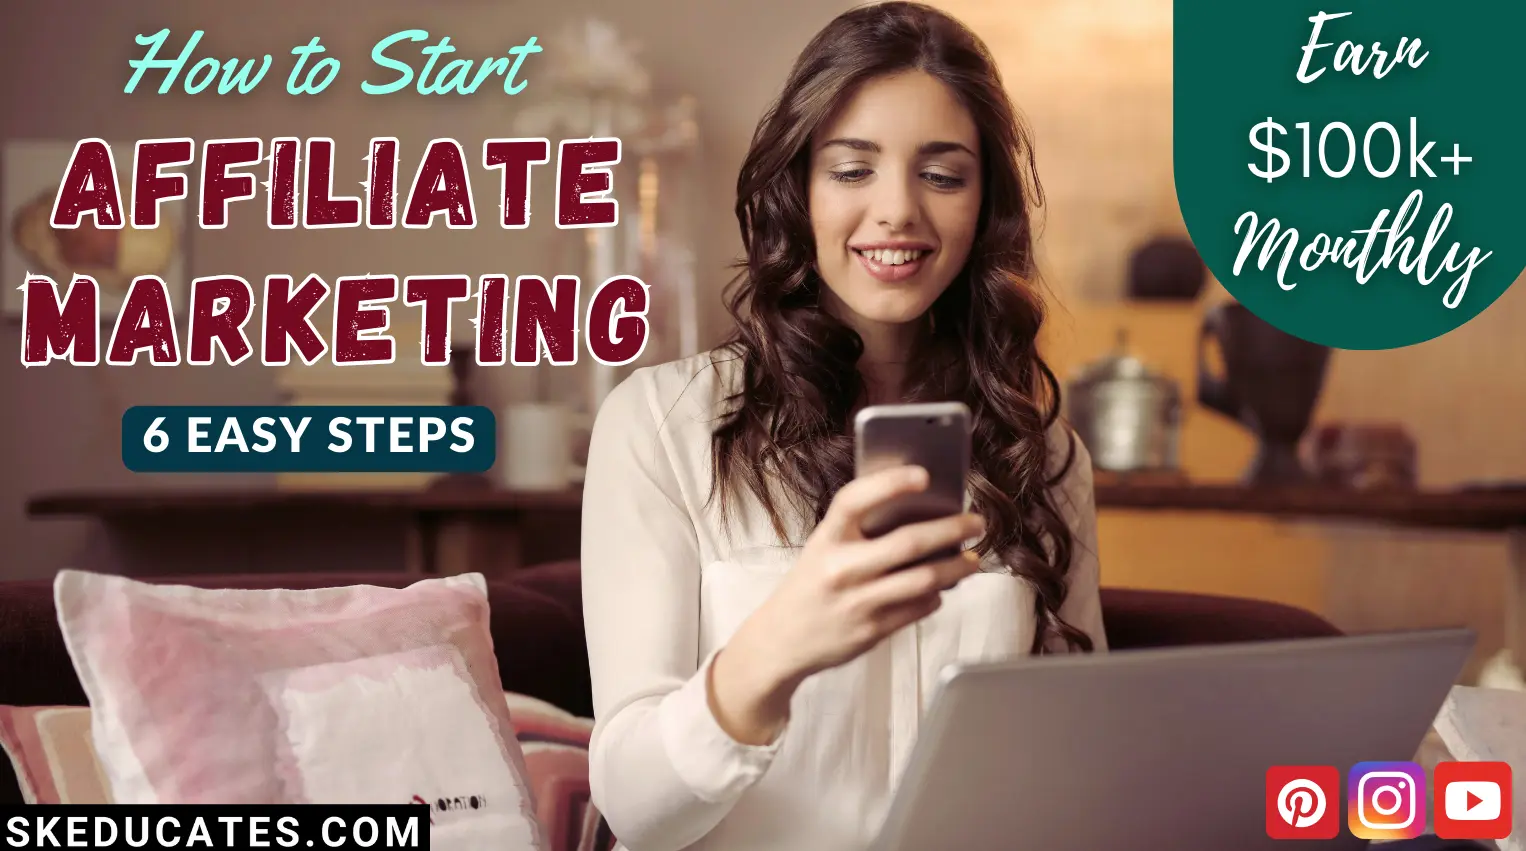 how-to-start-affiliate-marketing-skeducates